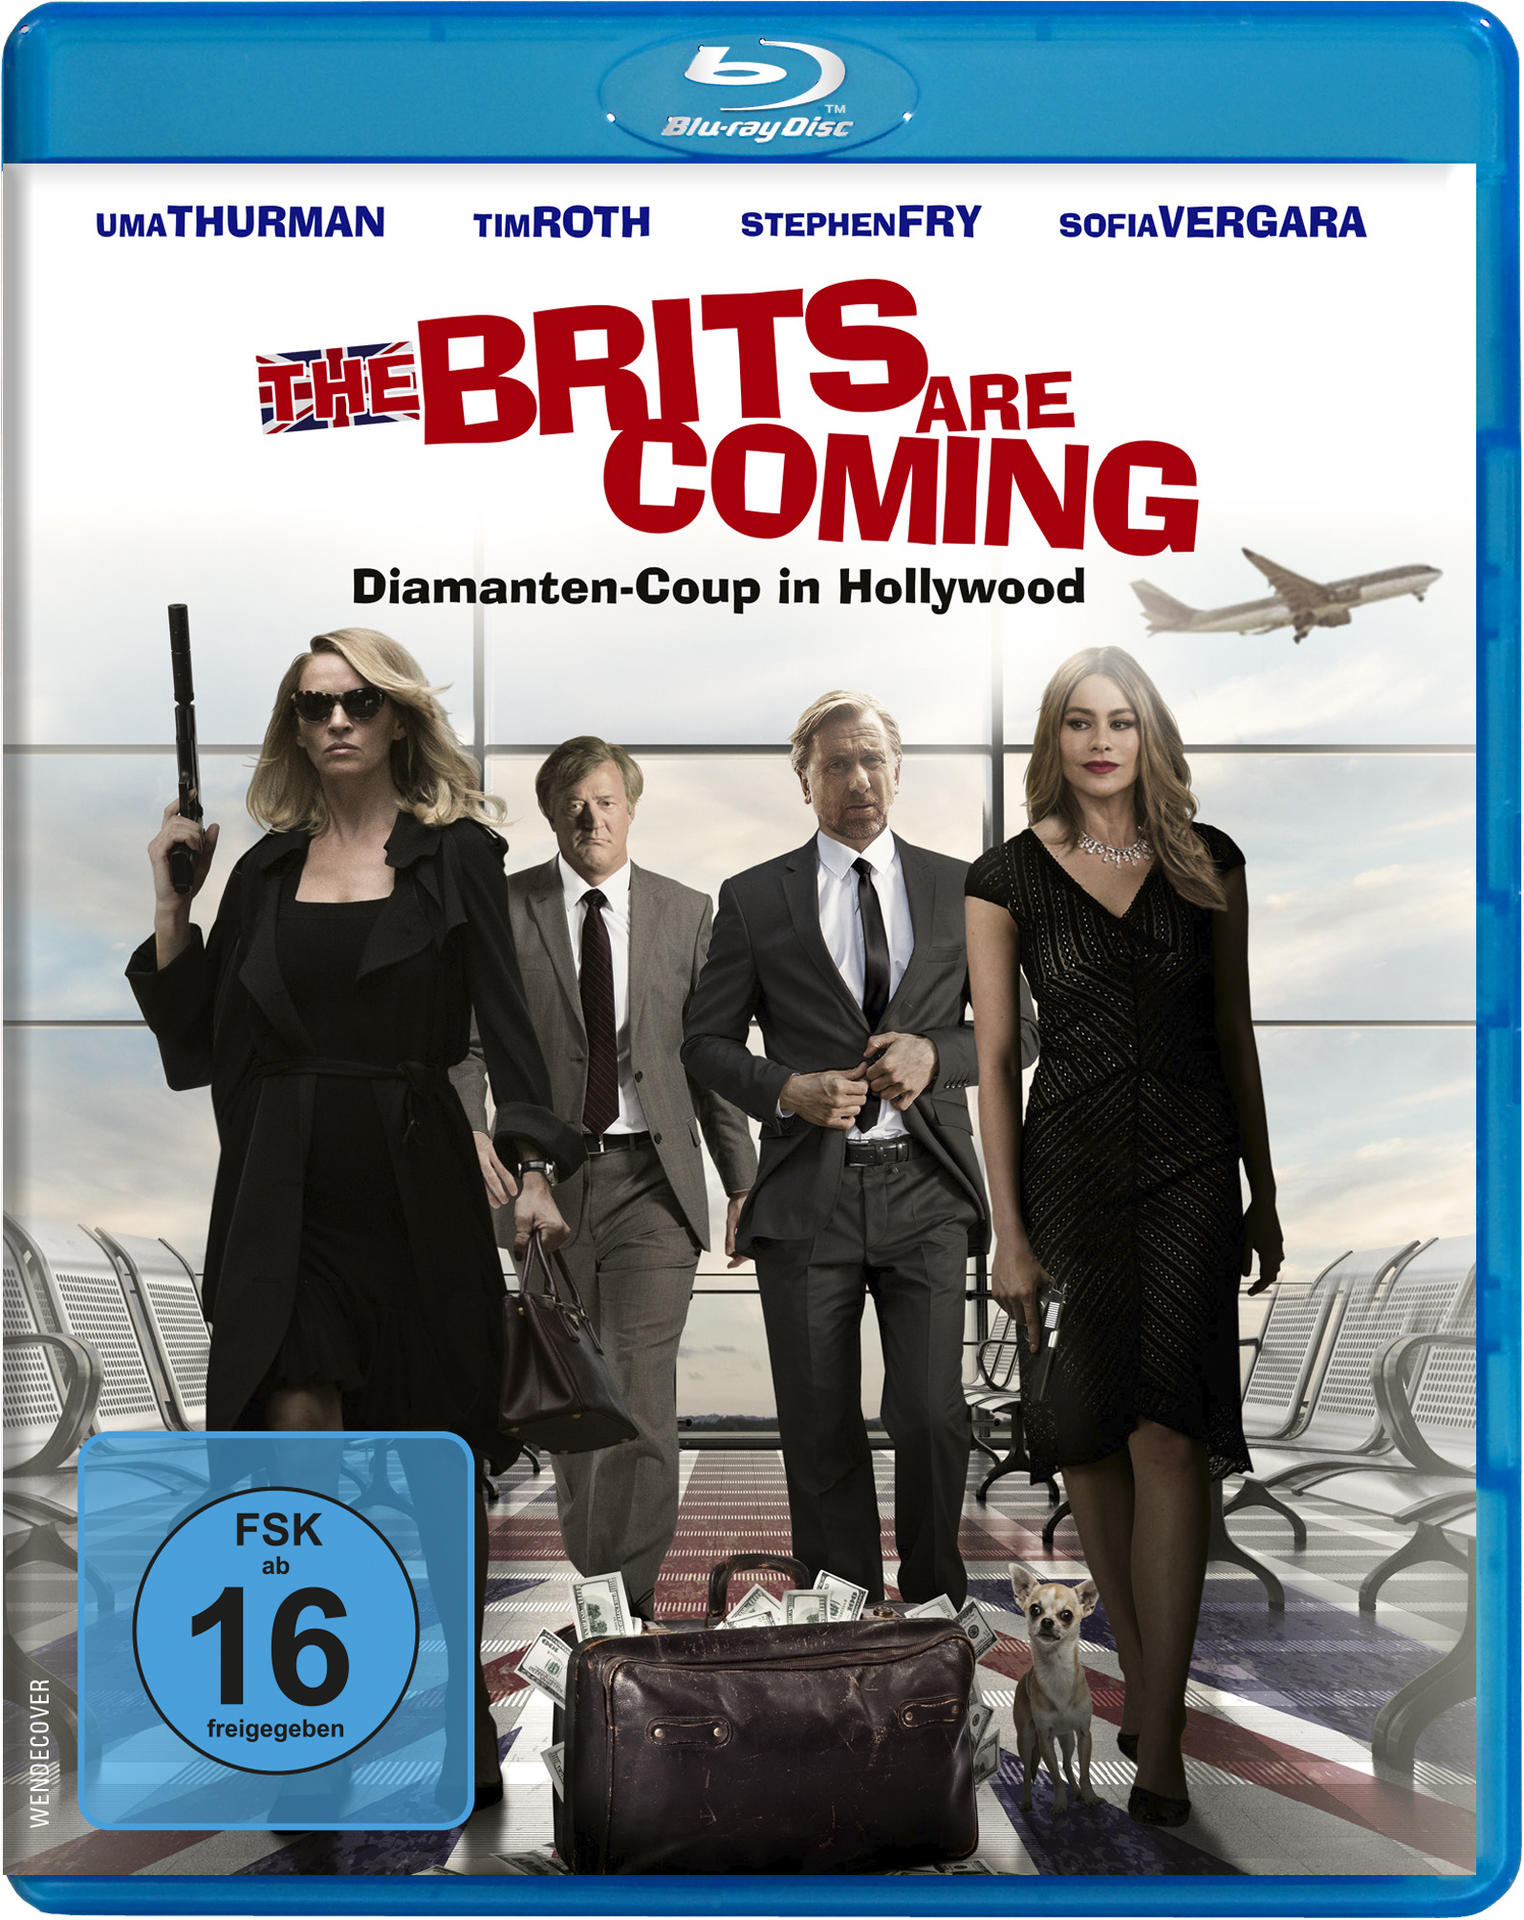 Blu-ray Diamanten-Coup in coming The Hollywood - are Brits